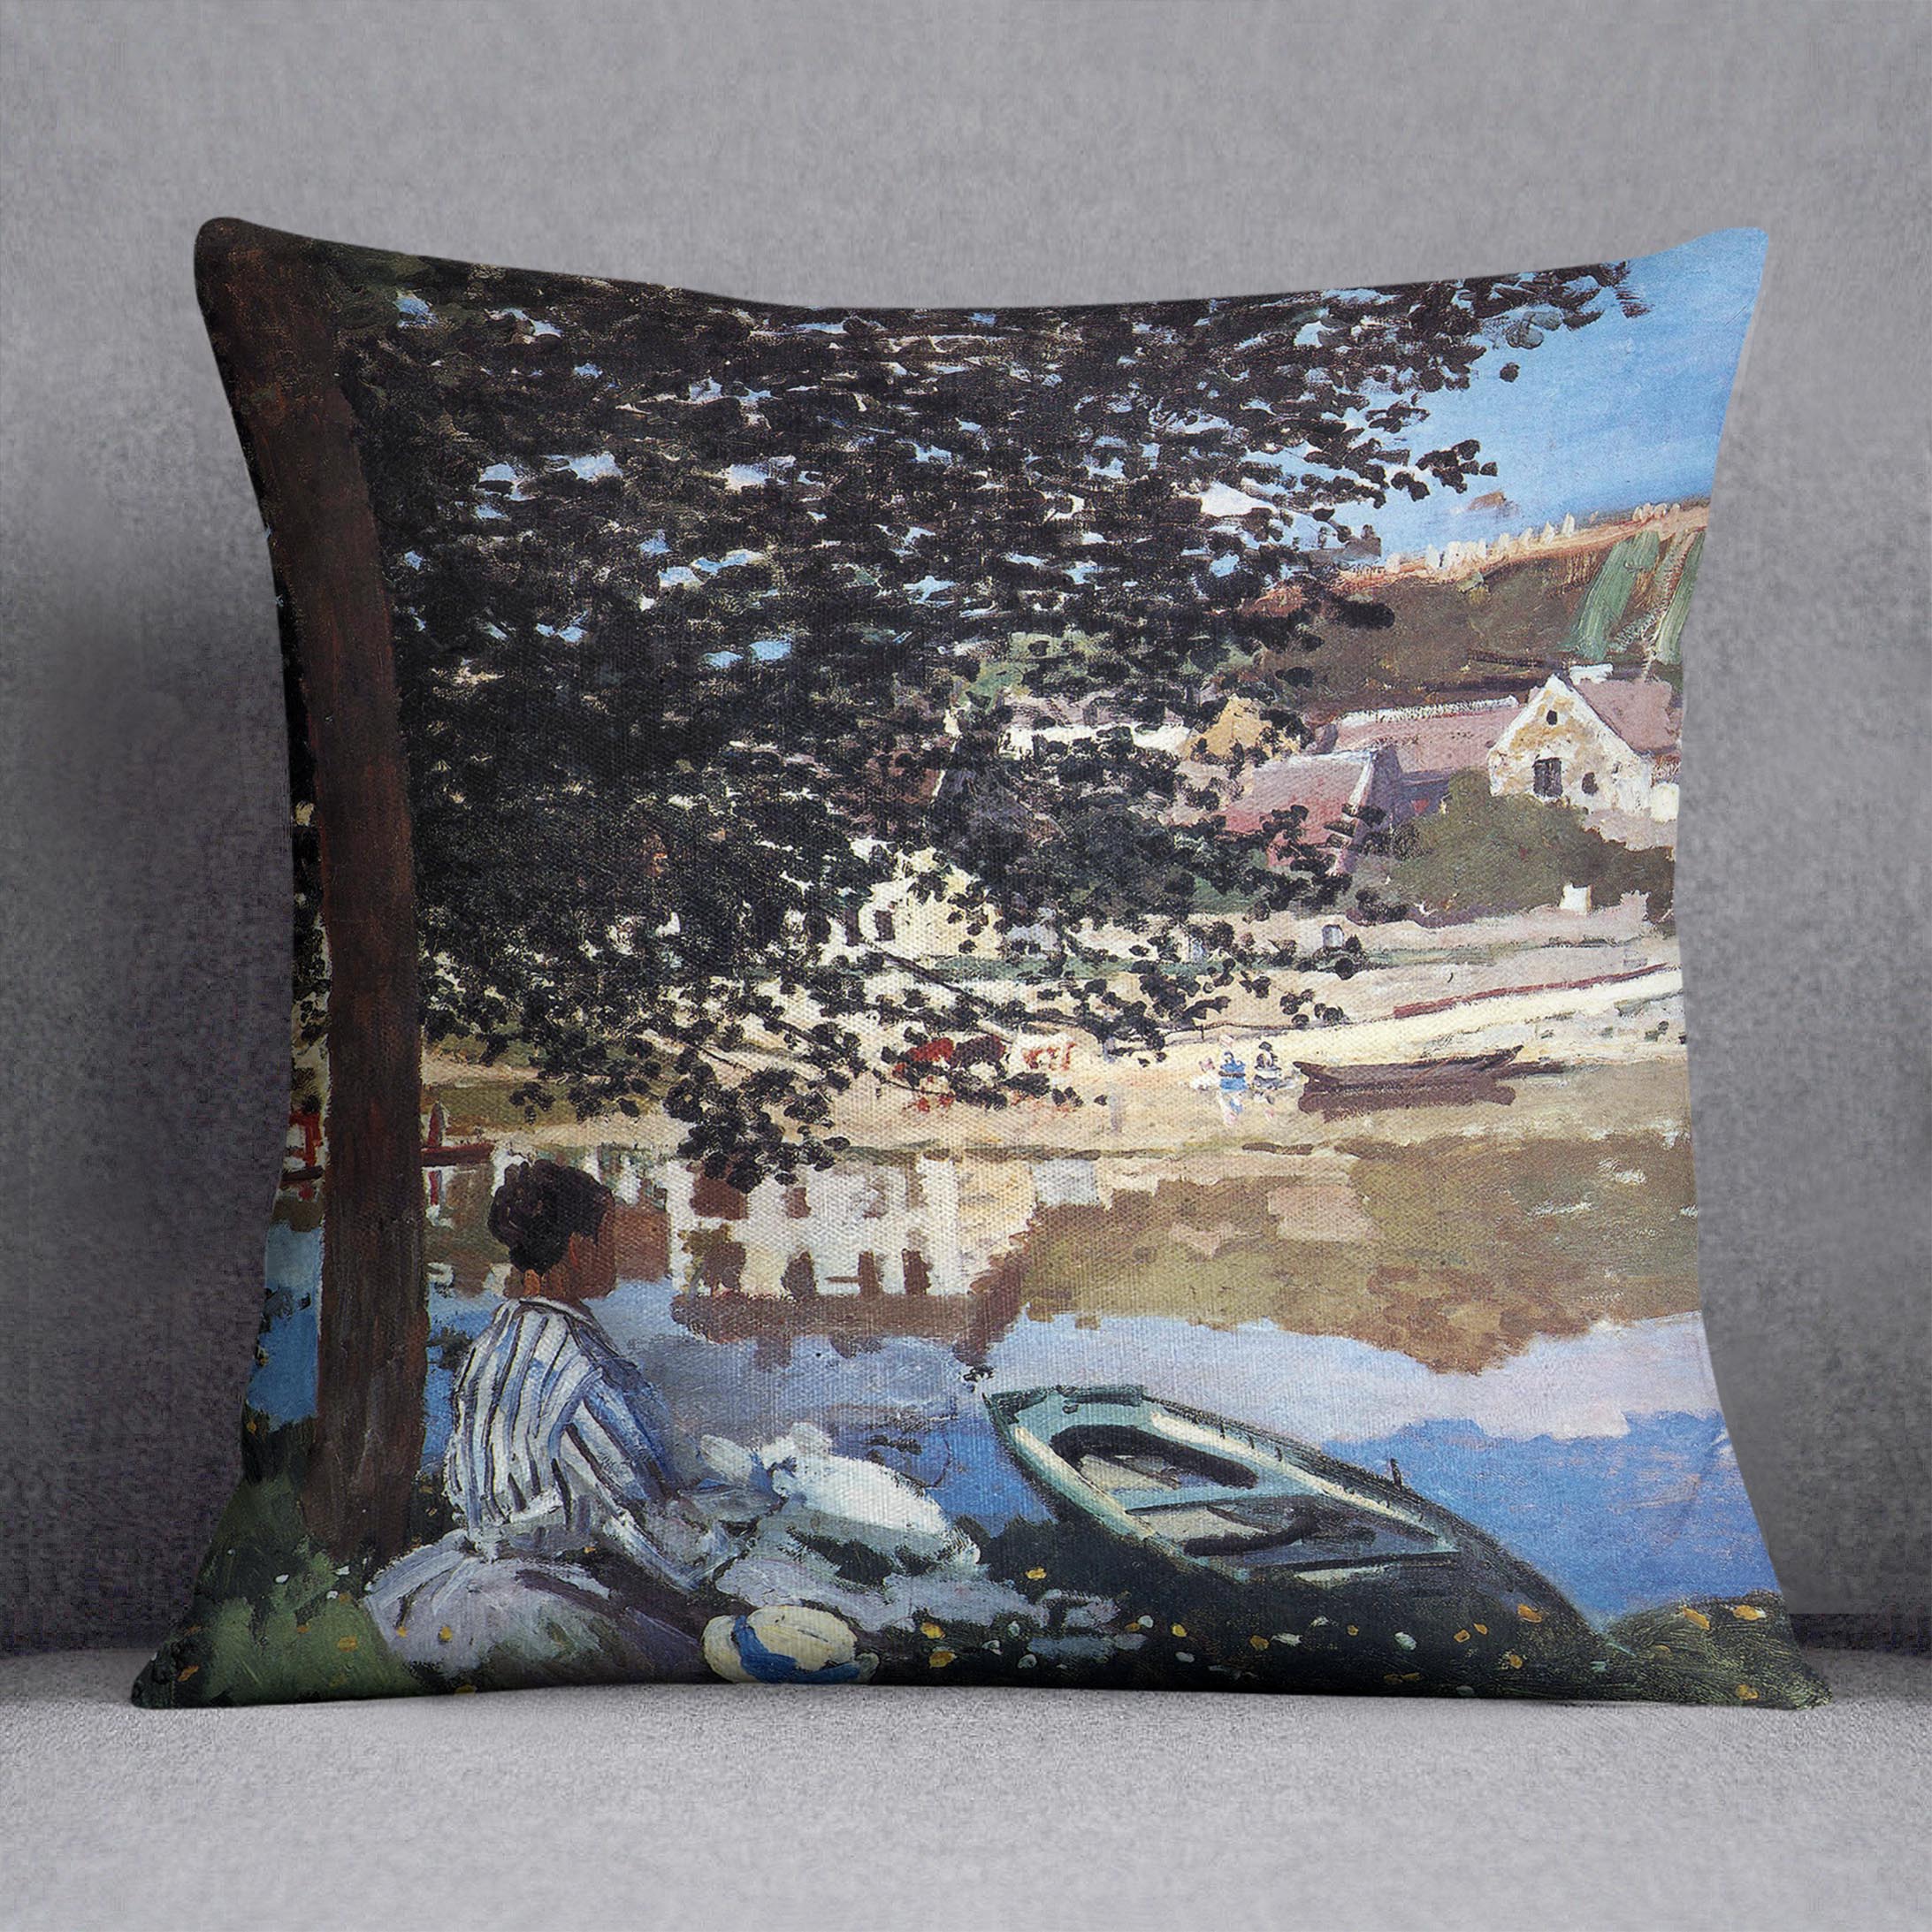 The river has burst its banks by Monet Cushion